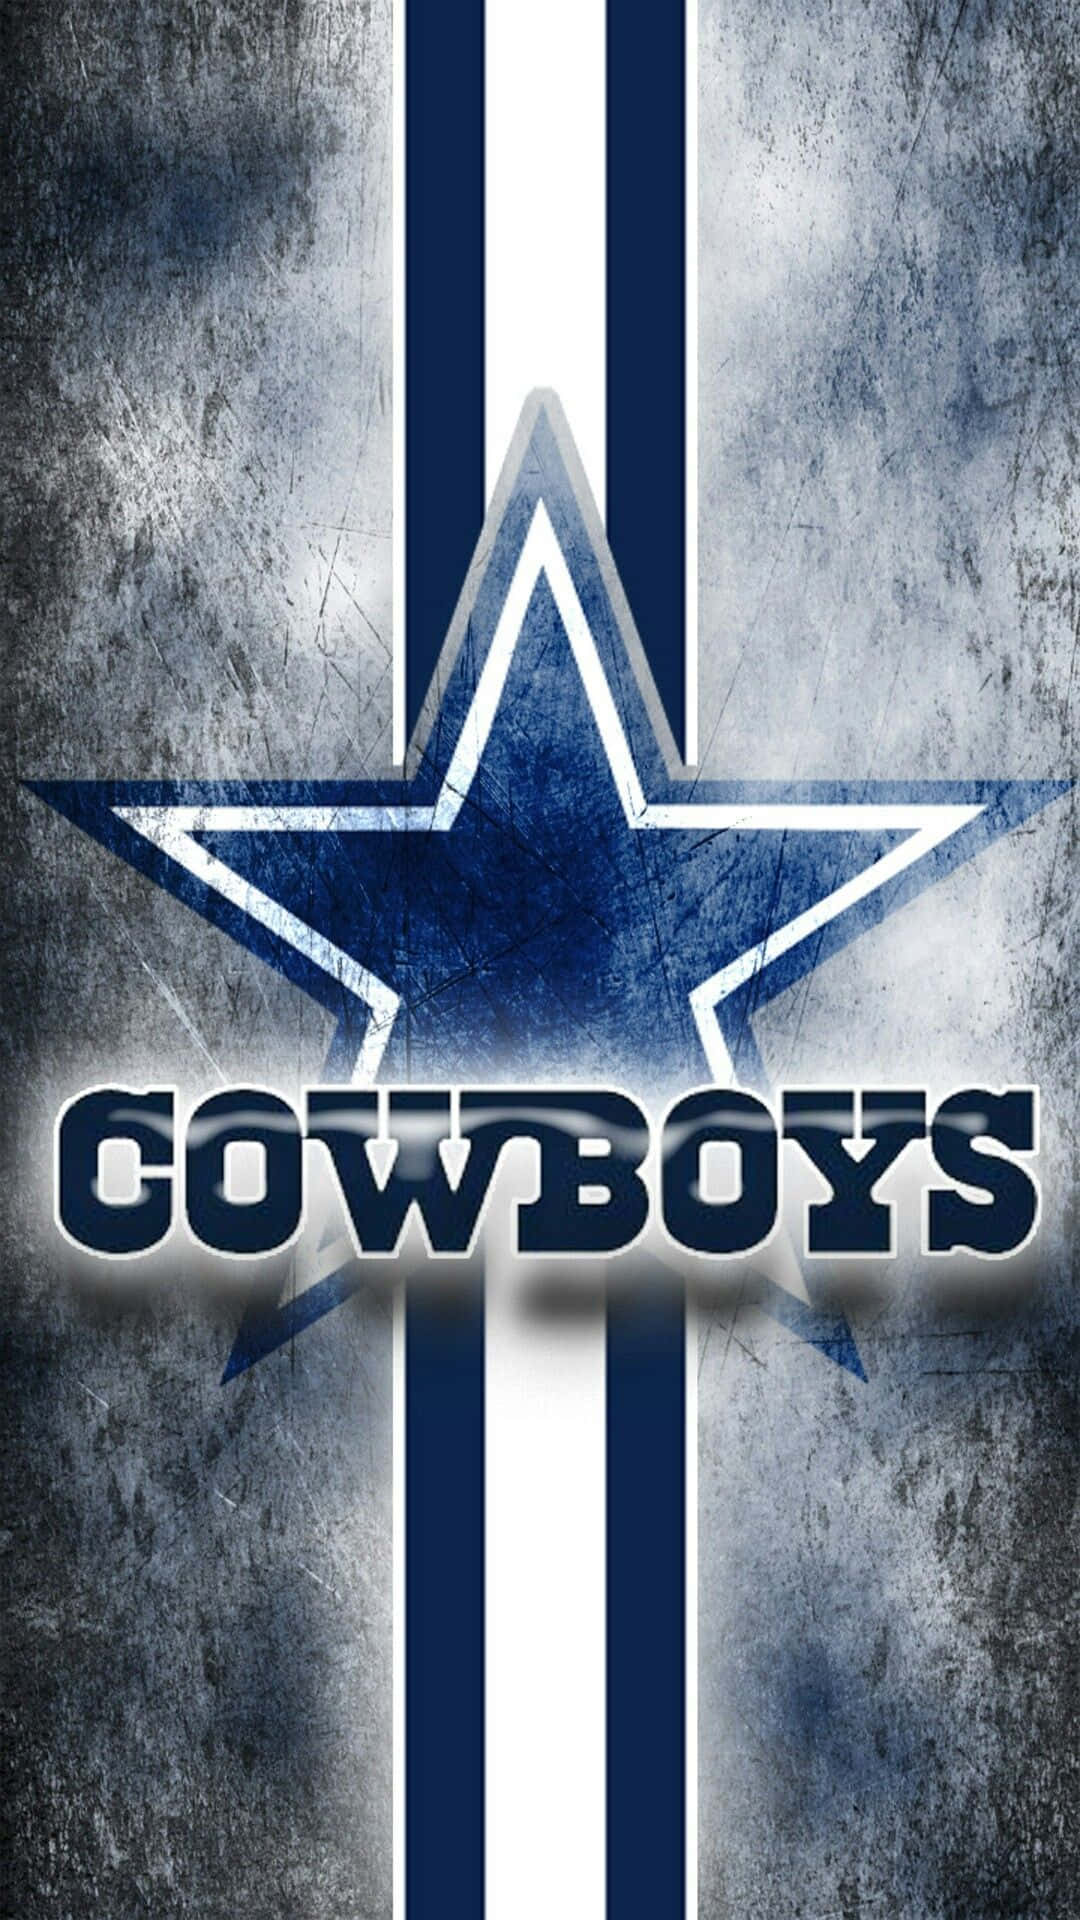 Dallas Cowboys Wallpaper Browse Dallas Cowboys Wallpaper with collections  of Android Cool Dallas Cowboys Gir  Dallas cowboys wallpaper Dallas  cowboys Cowboys